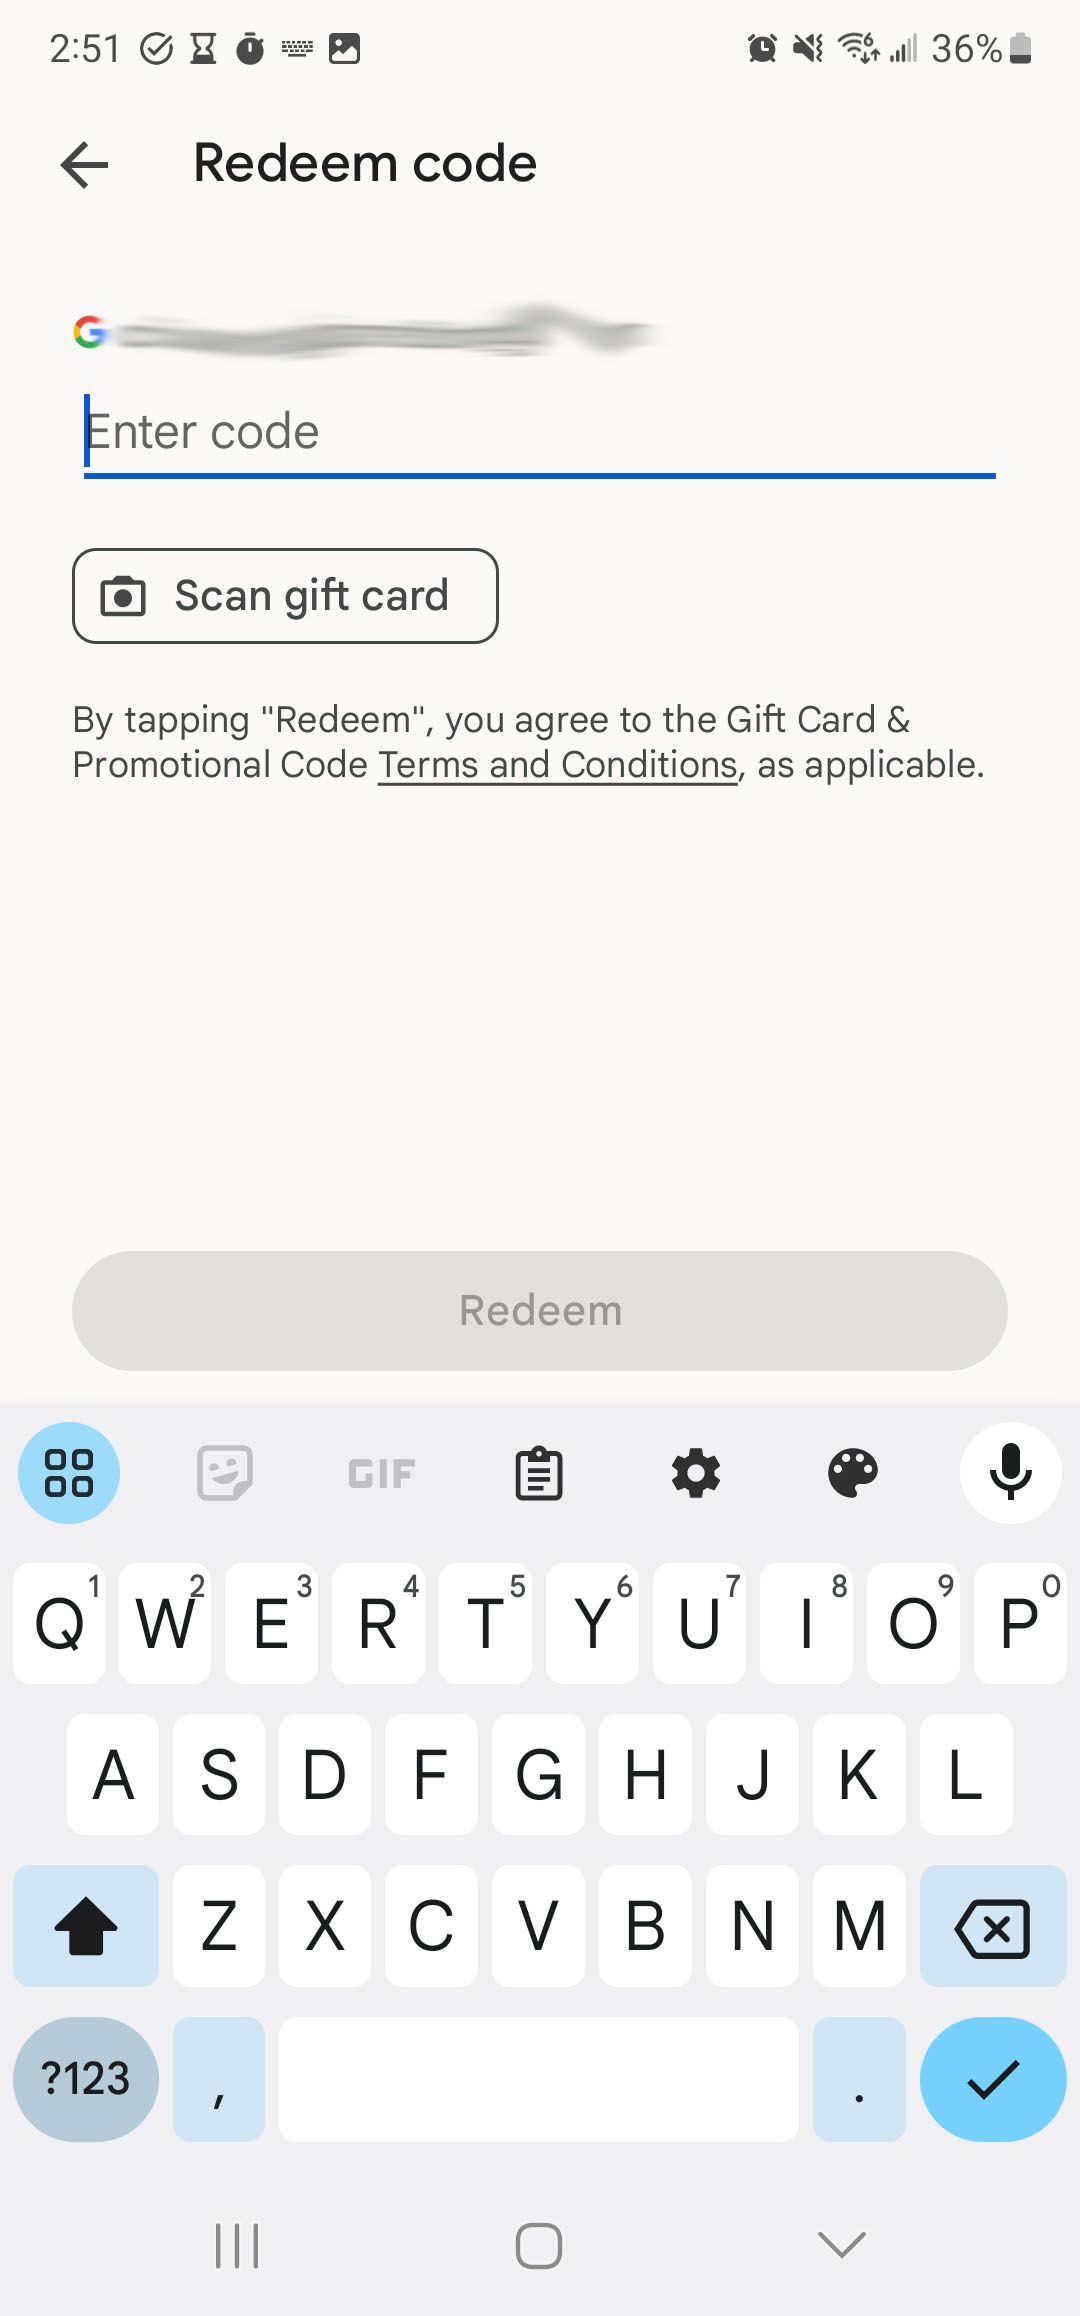 A screenshot of the Google Play Store app's "Redeem Code" page.